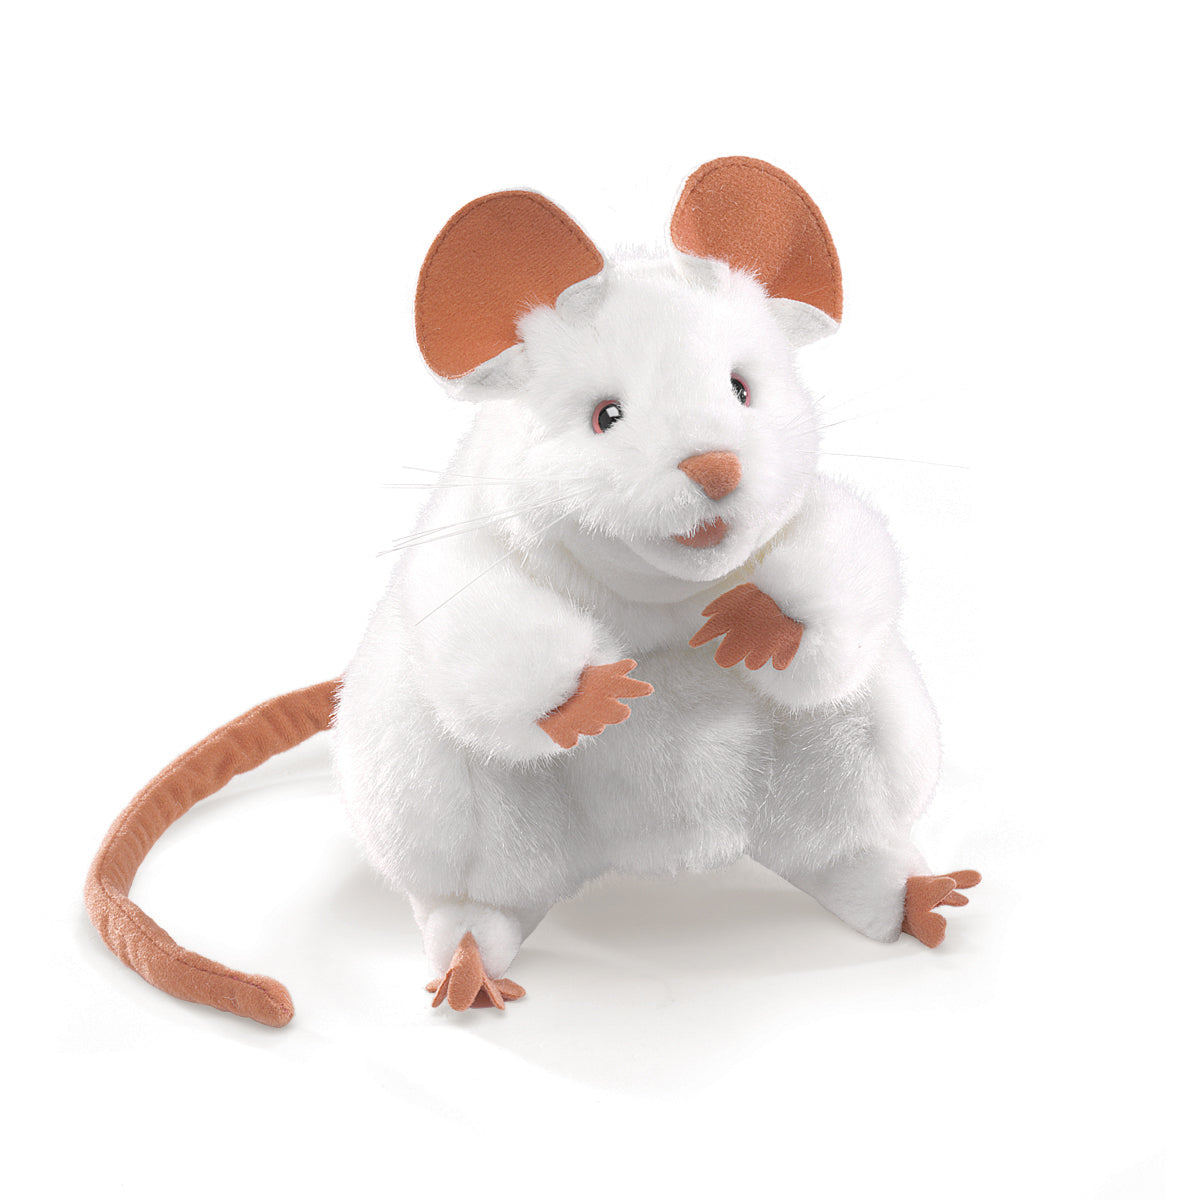 White Mouse Hand Puppet - Folkmanis